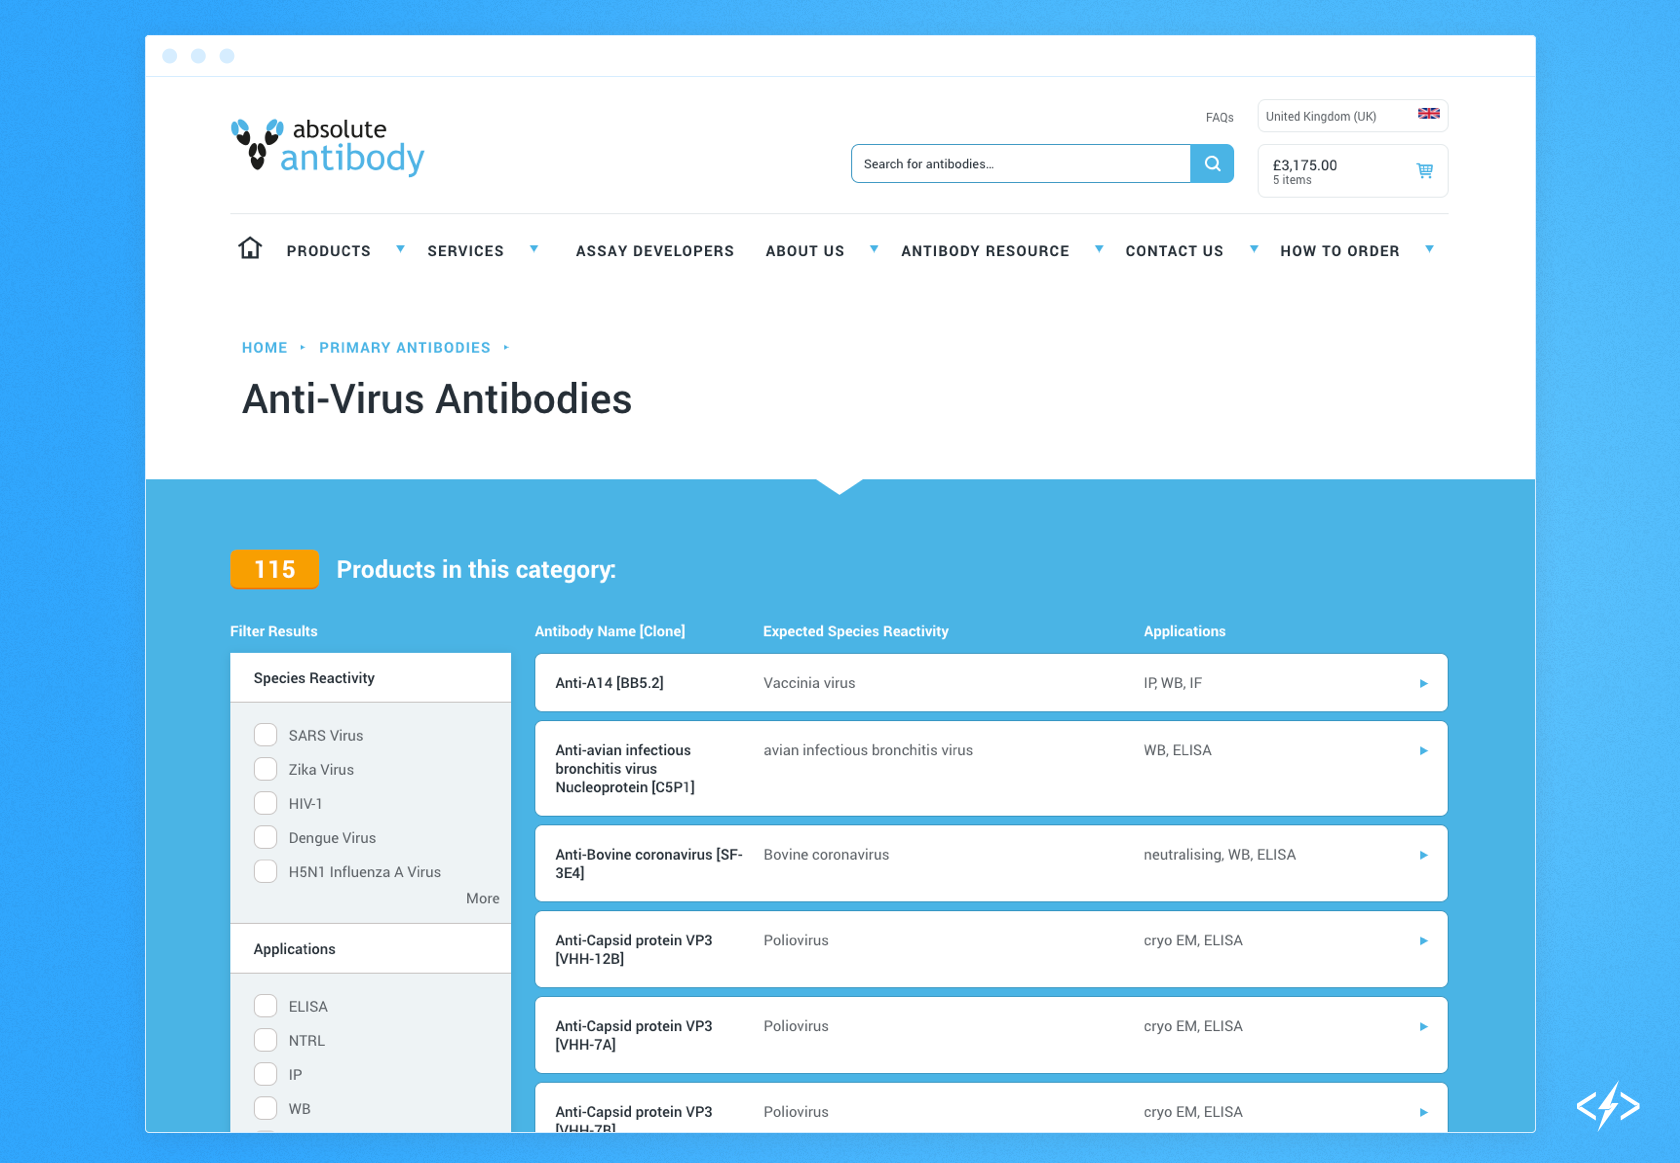 The Absolute Antibody site features an extensive catalog of reagents for research and diagnostic use, including antibodies against viral antigens